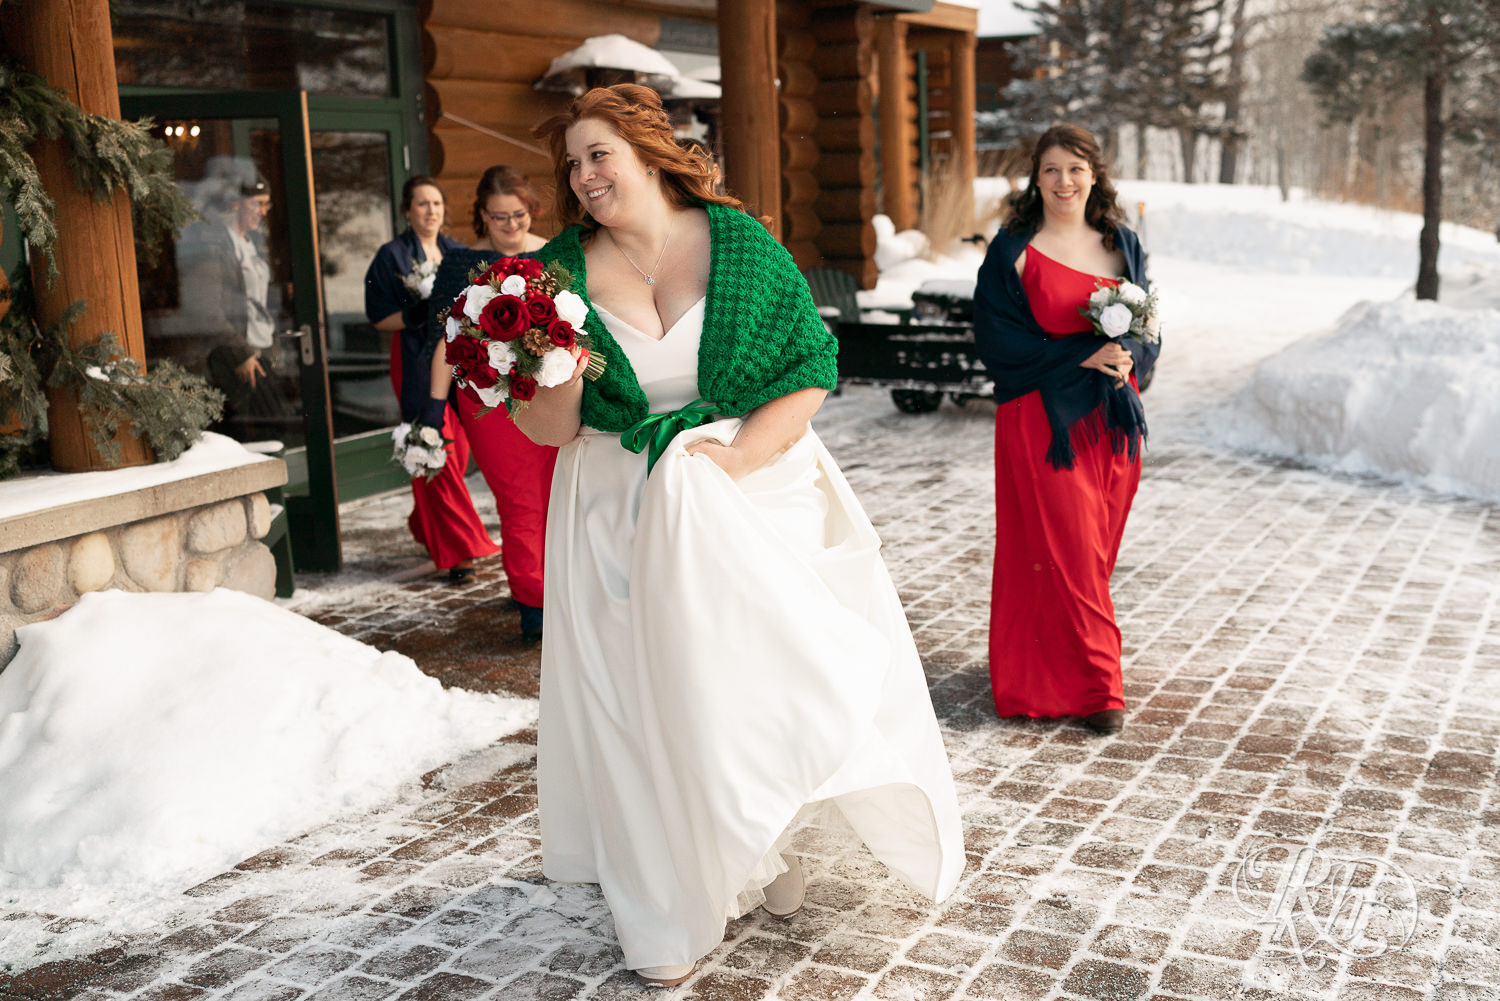 Winter wedding party  in the snow at Grand Superior Lodge in Two Harbors, Minnesota.